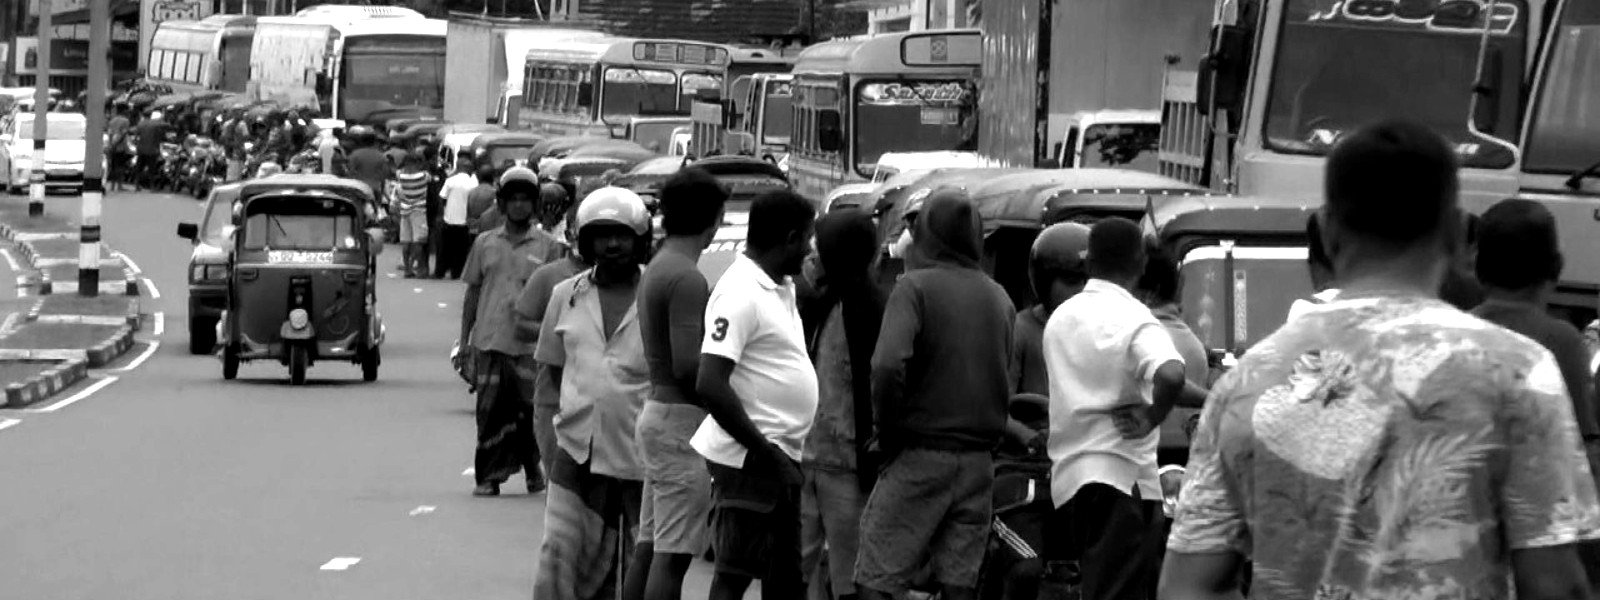 Long Queues for Fuel, and Gas as crisis worsens in Sri Lanka